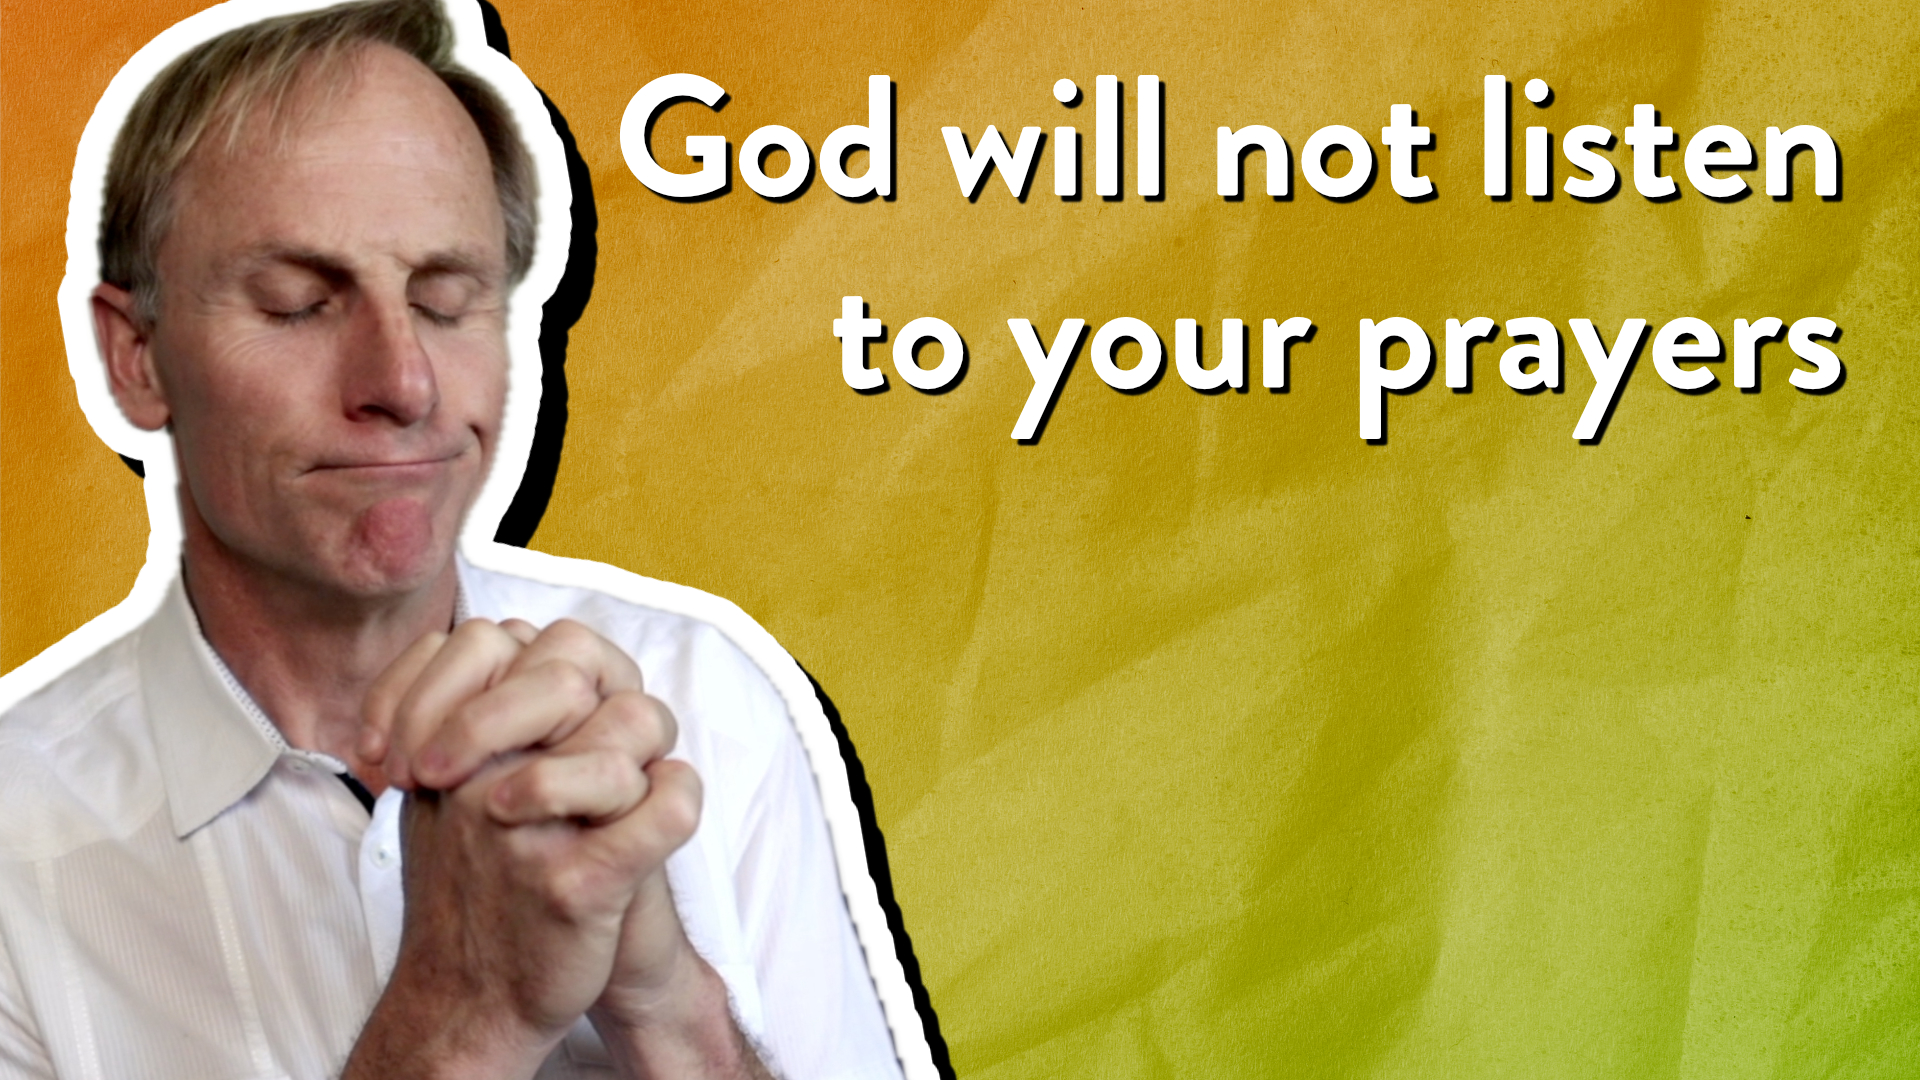 God will not listen to your prayers